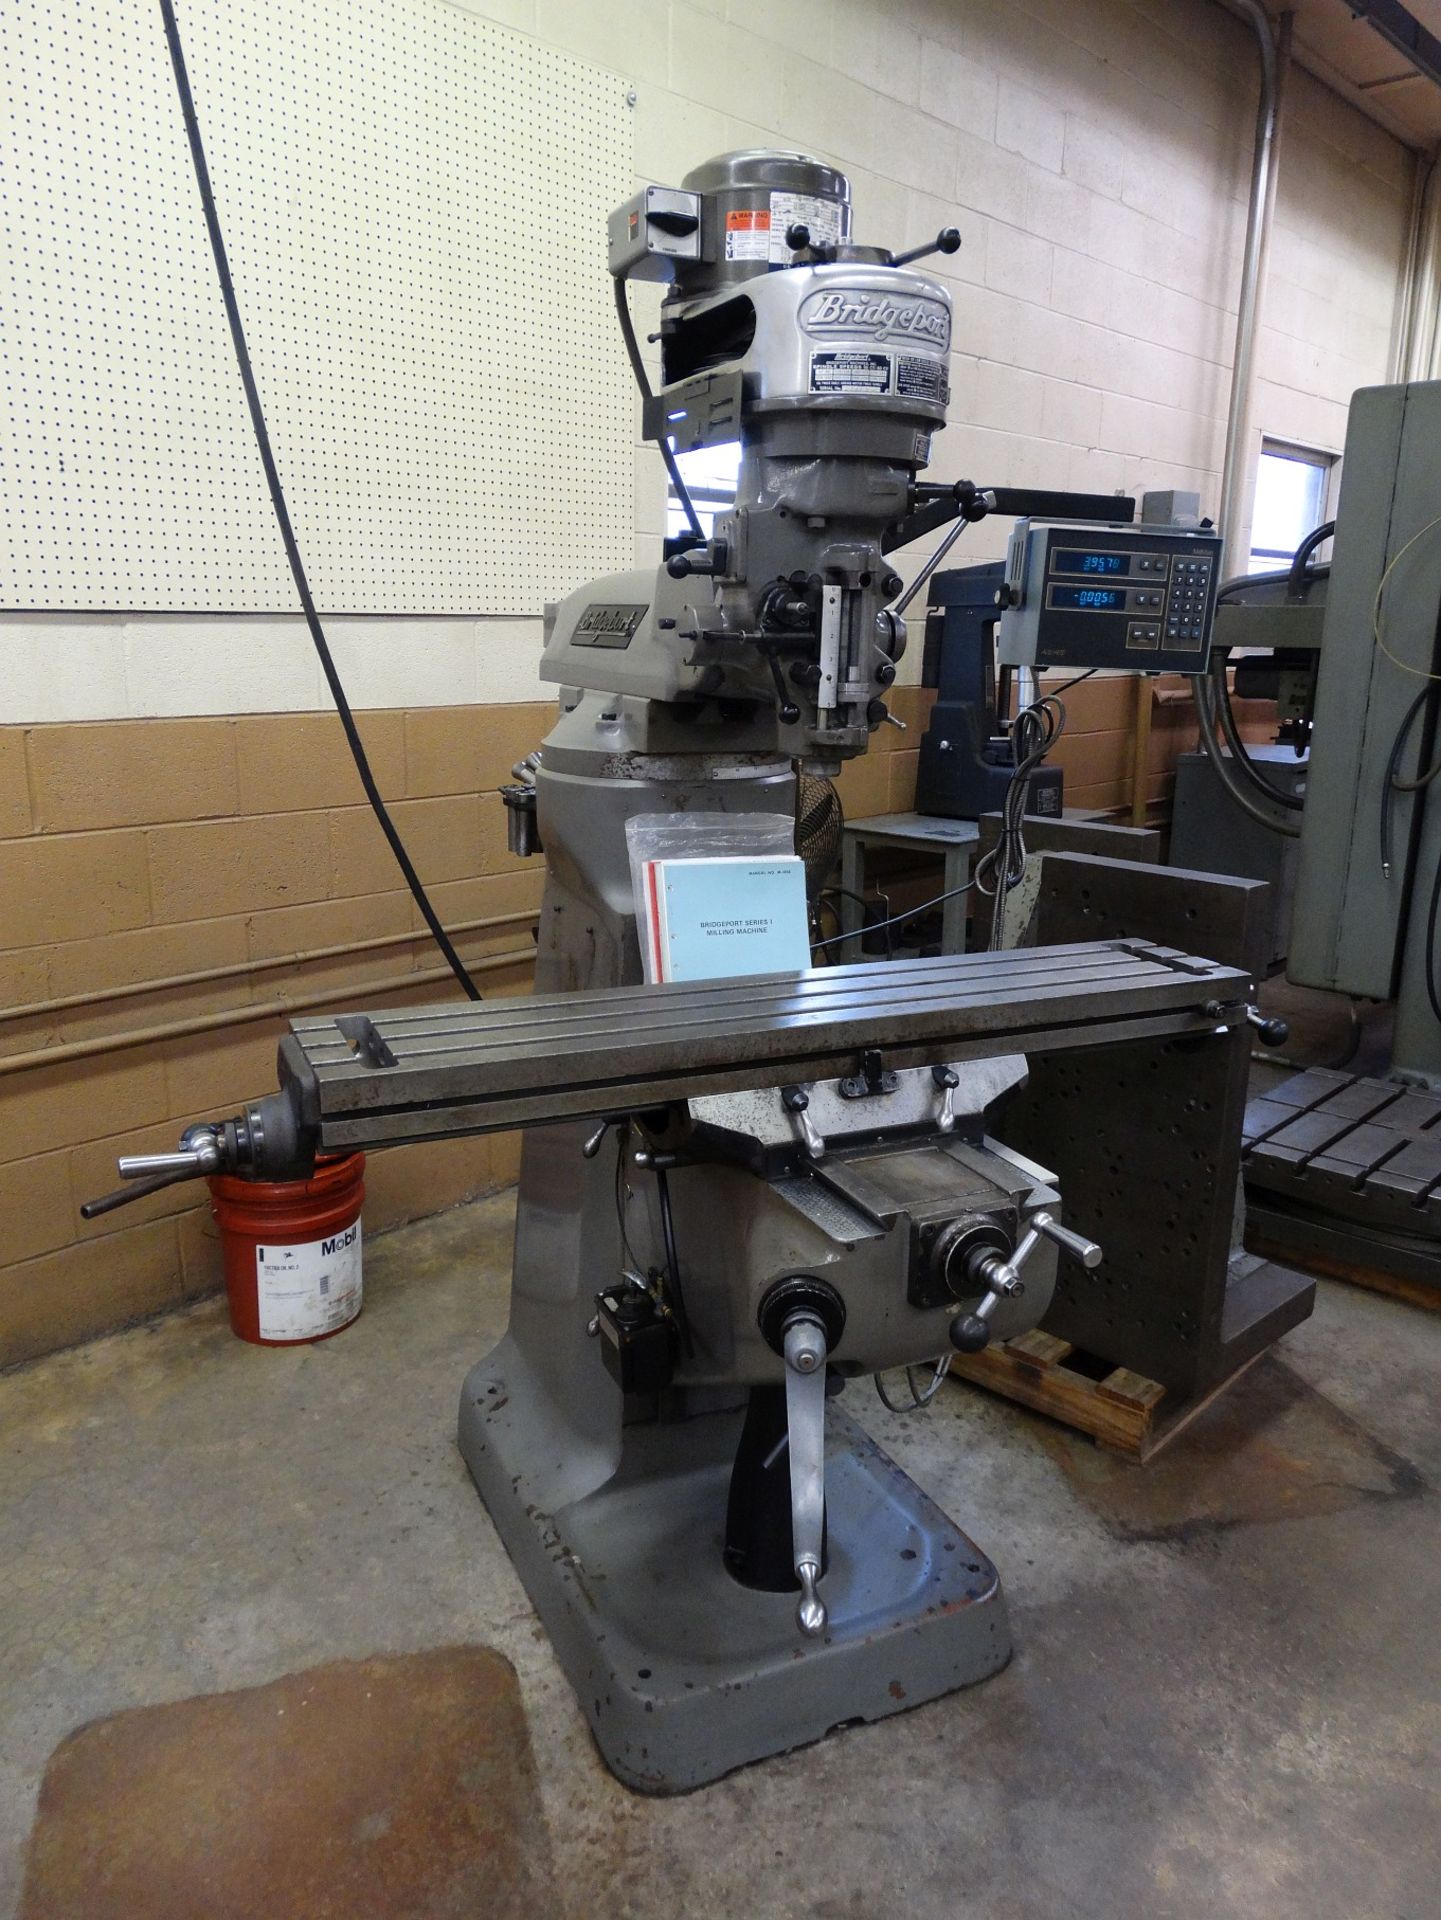 Bridgeport Series I Vertical Mill, 9" x 48" table, Chrome Hard Ways, SN BR271853, w/ AccuRite